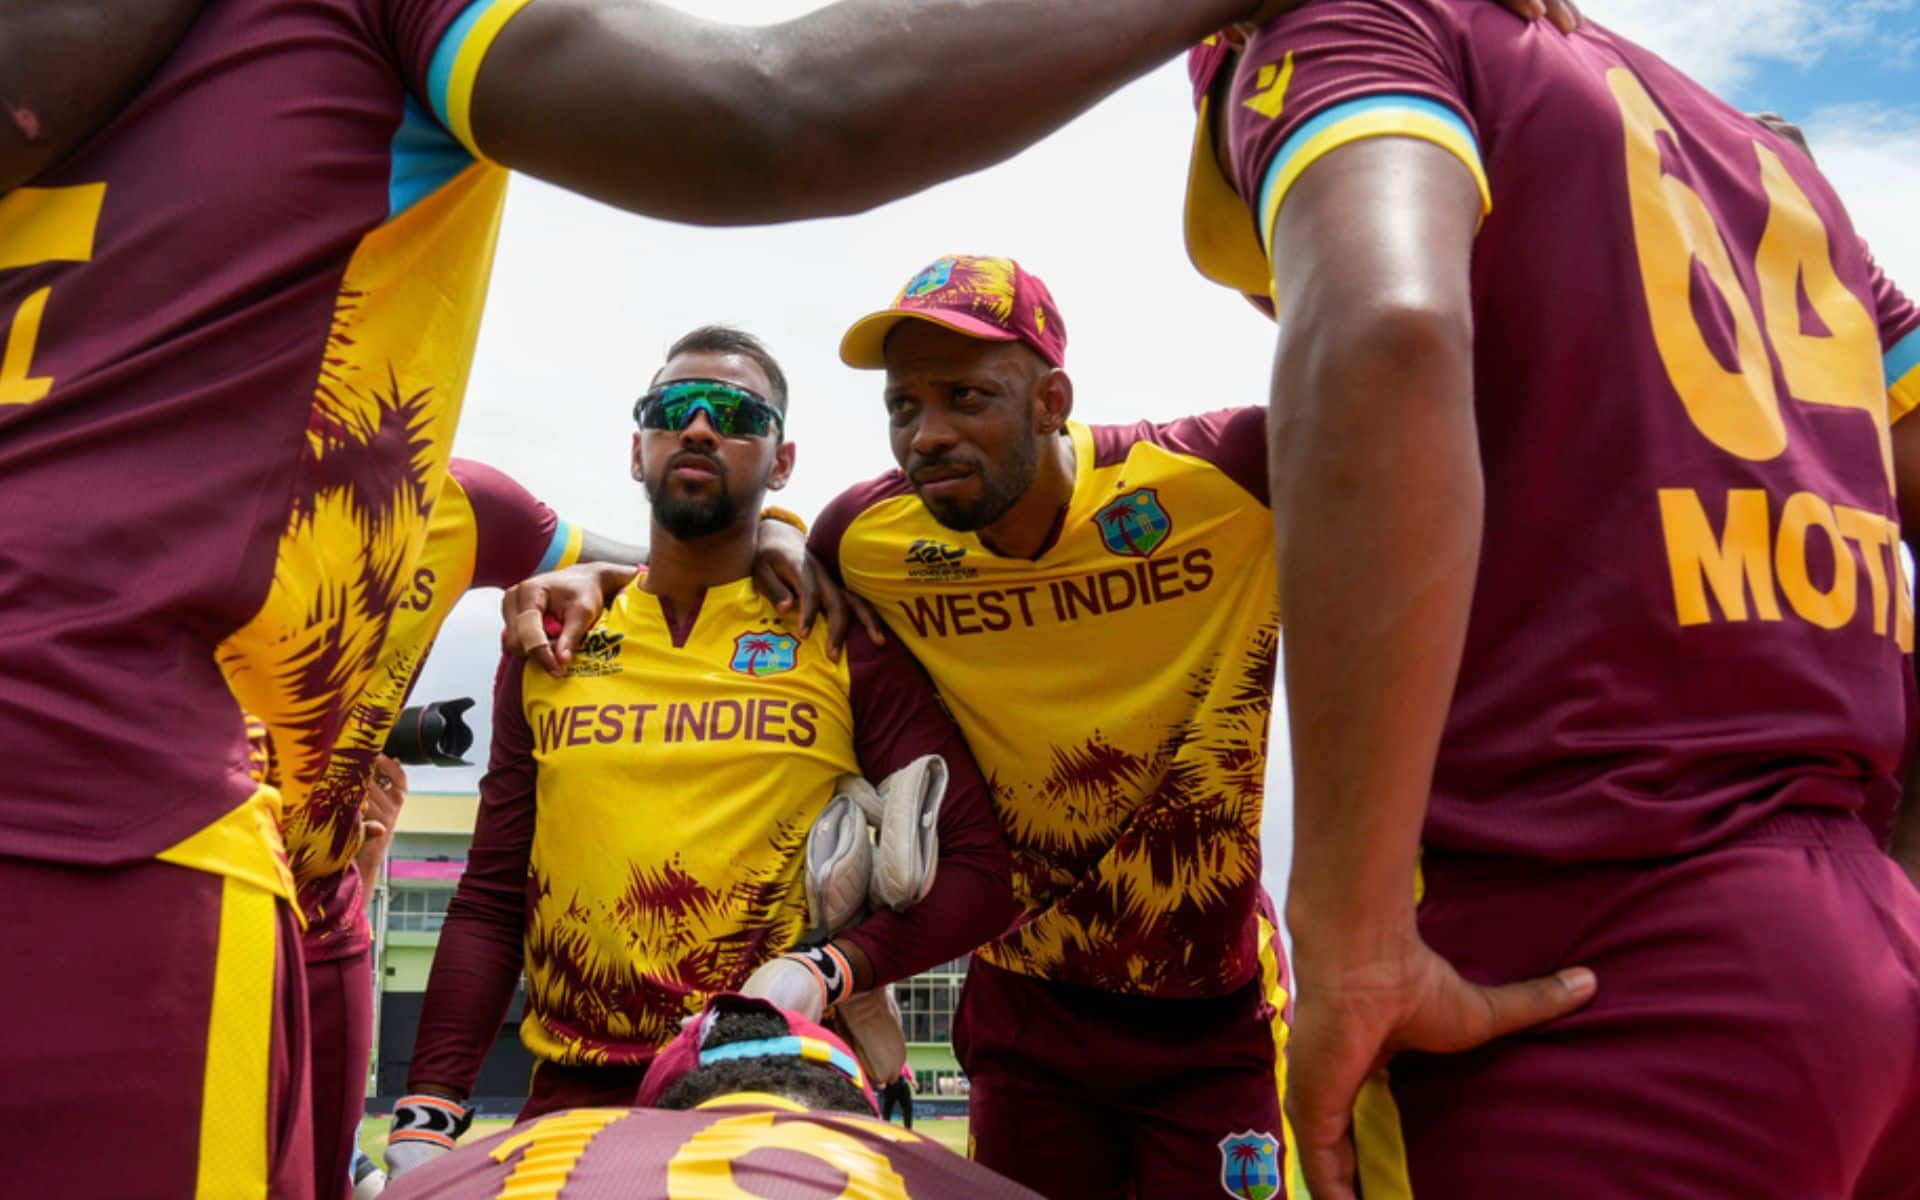 West Indies against PNG in the second match of the T20 World Cup [AP]